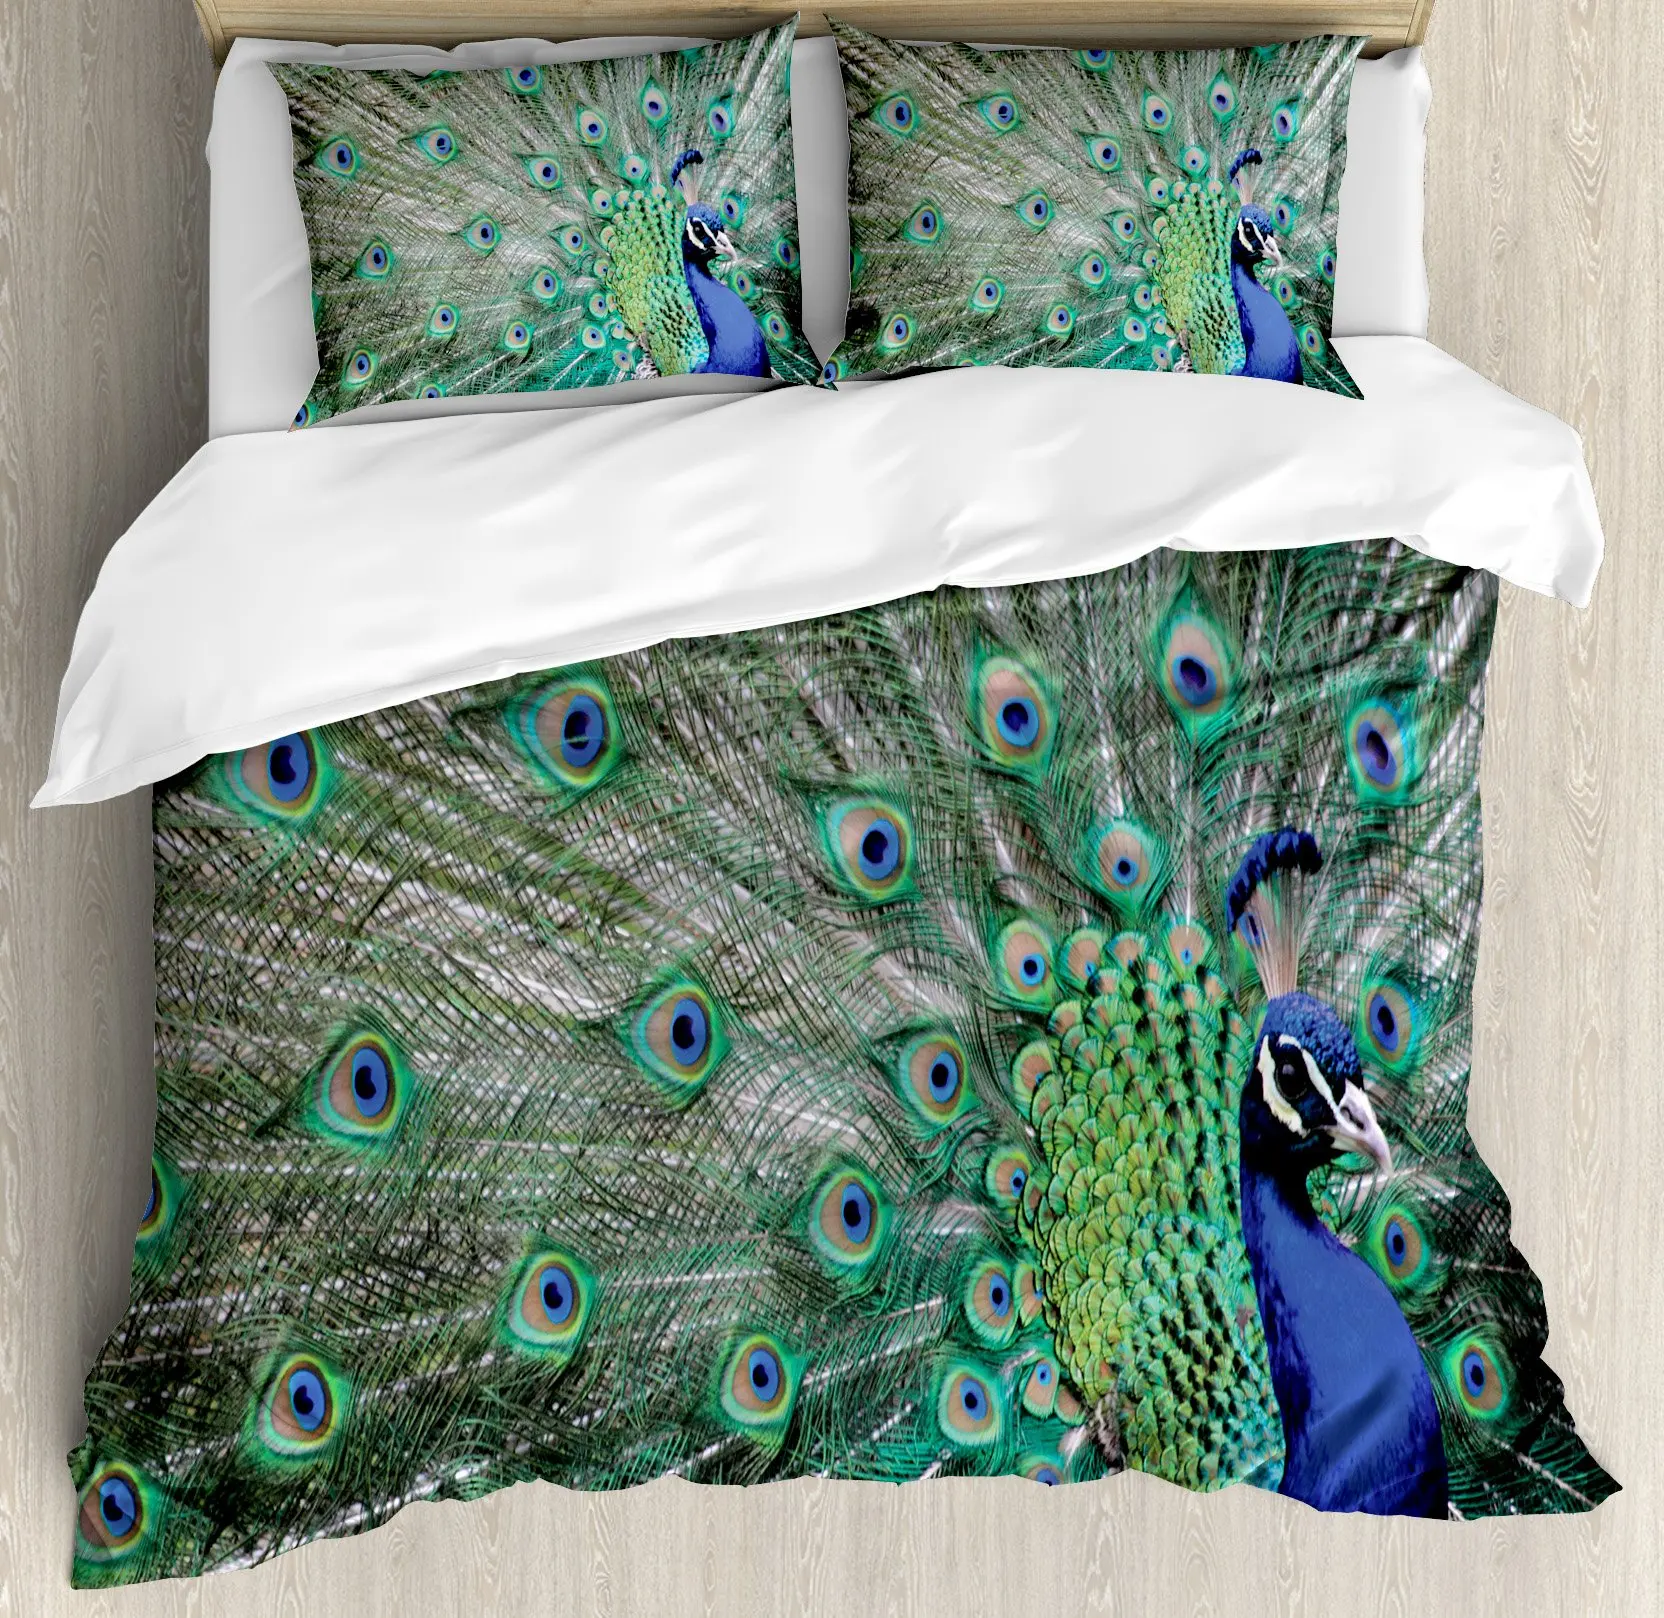 Cheap Peacock King Bedding, find Peacock King Bedding deals on line at ...